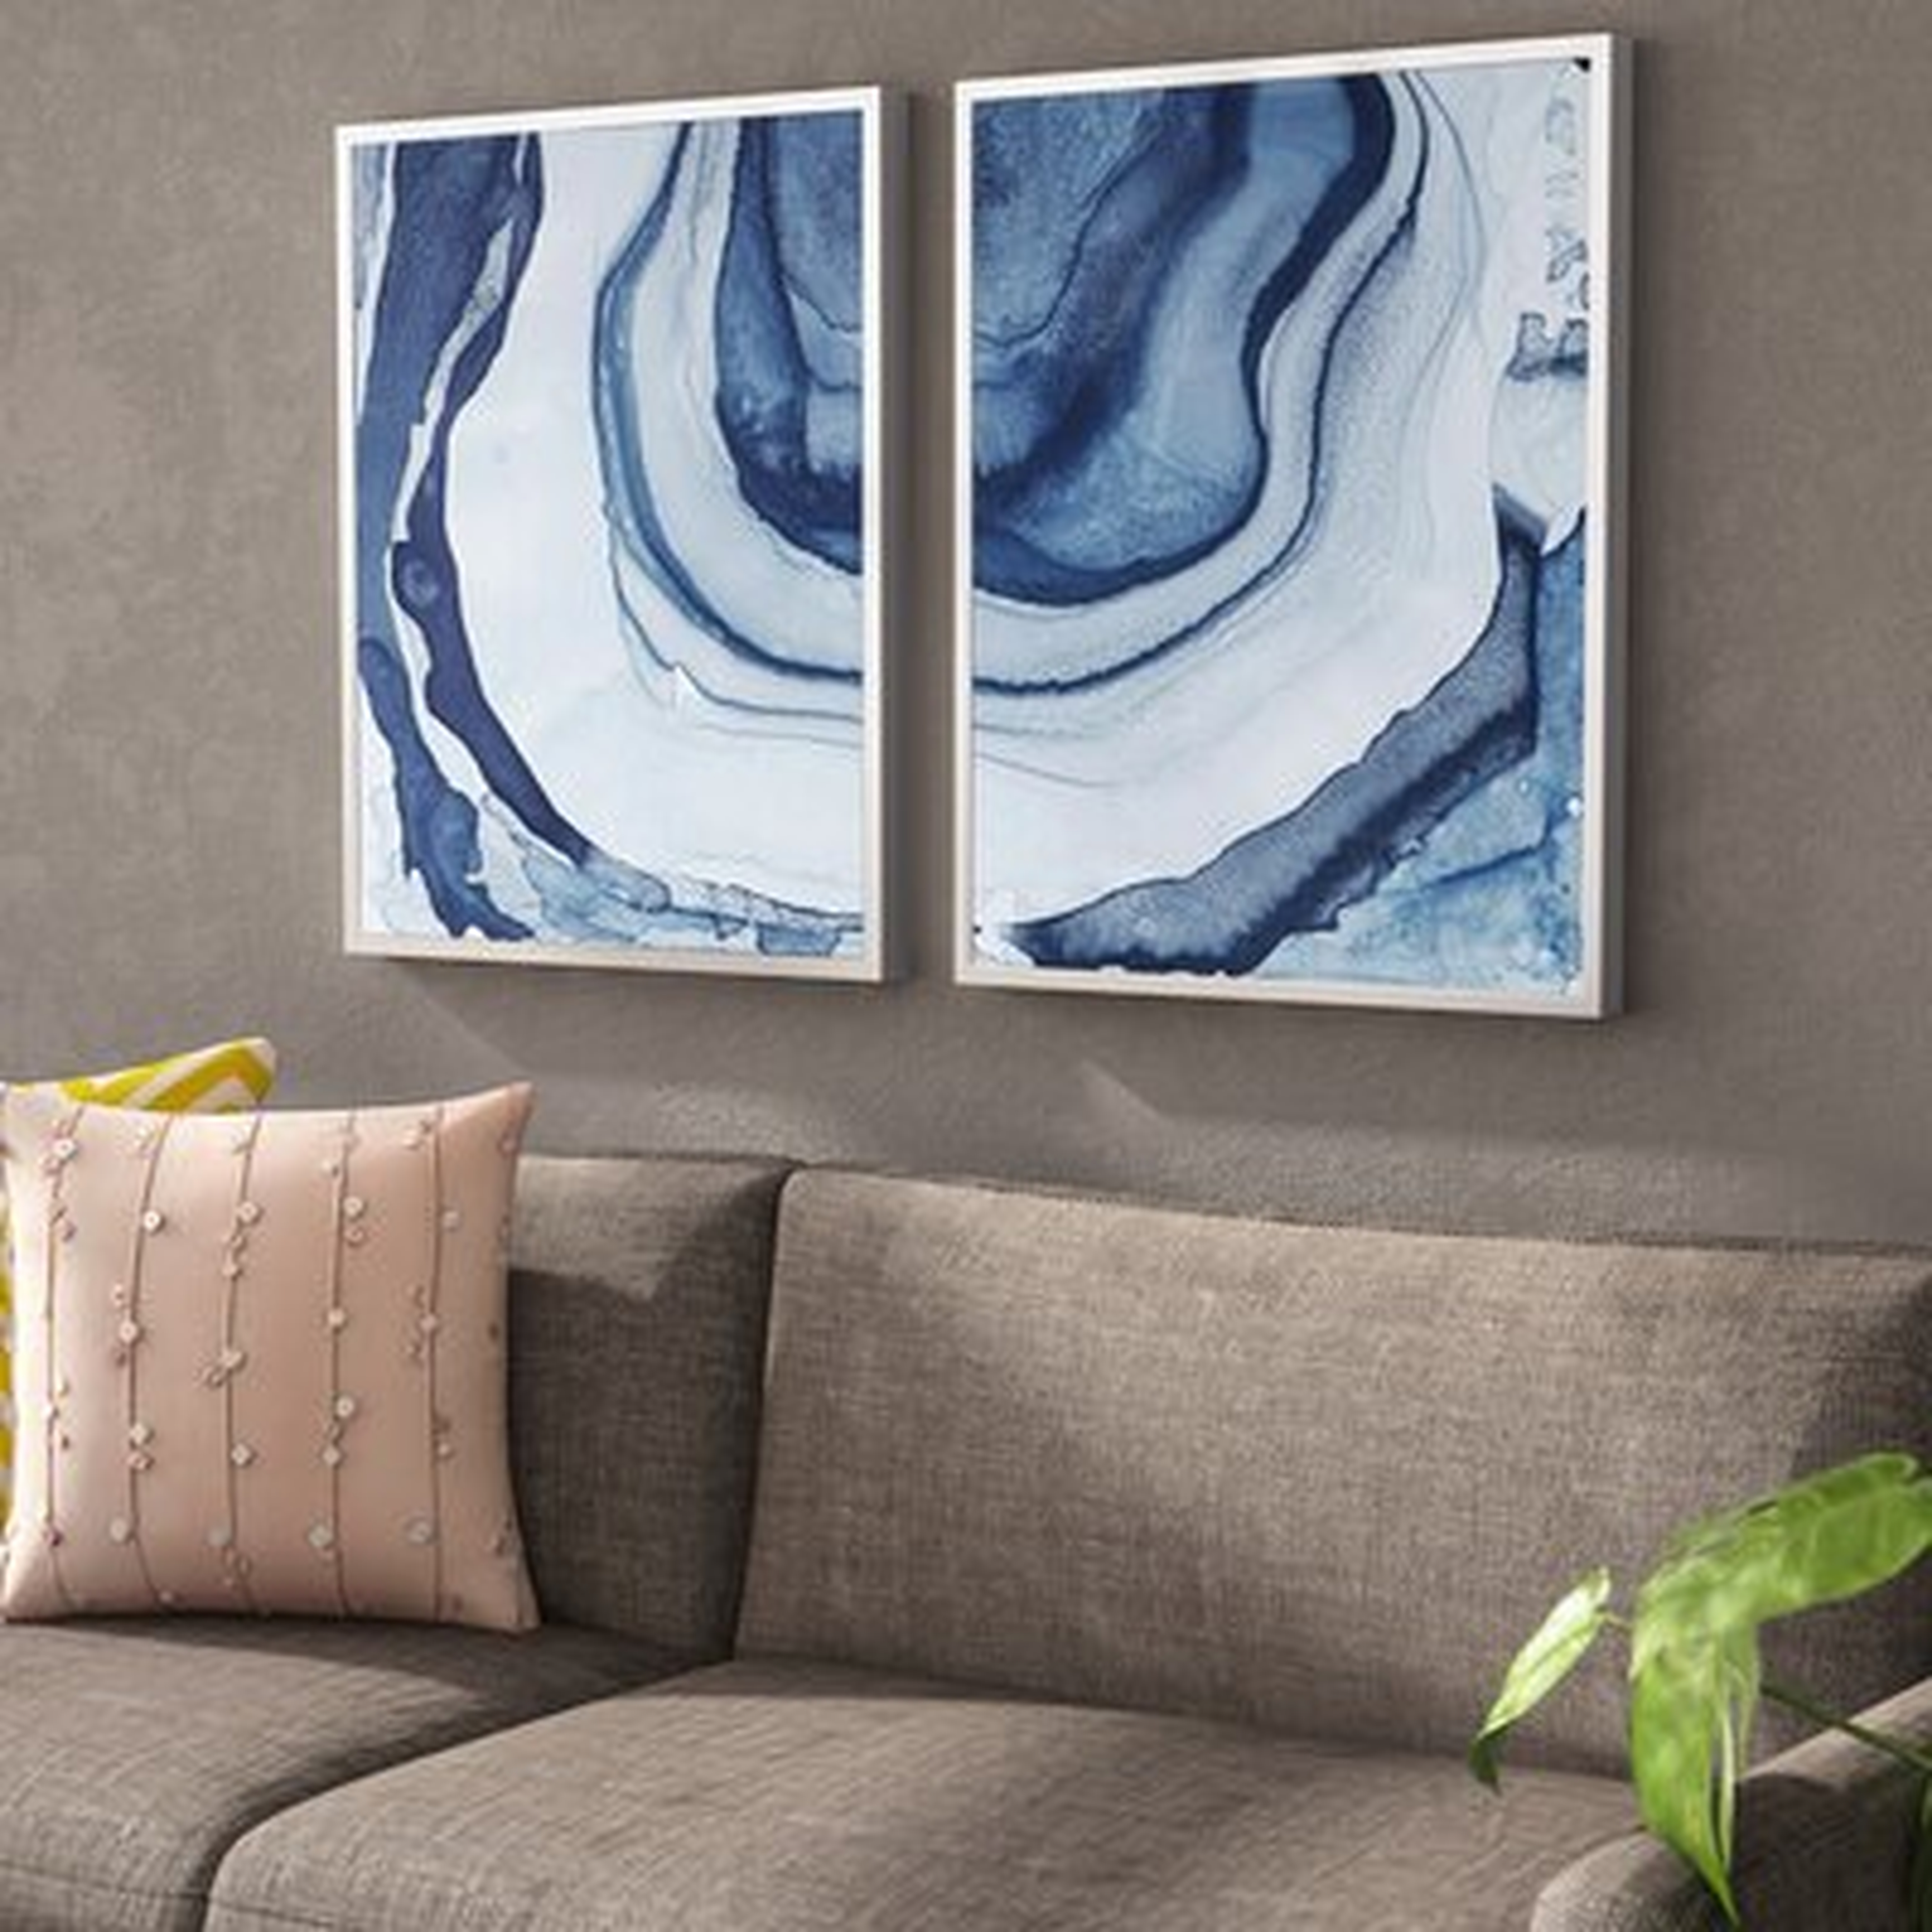 'Ethereal' - 2 Piece Picture Frame Painting Print Set on Canvas - Wayfair